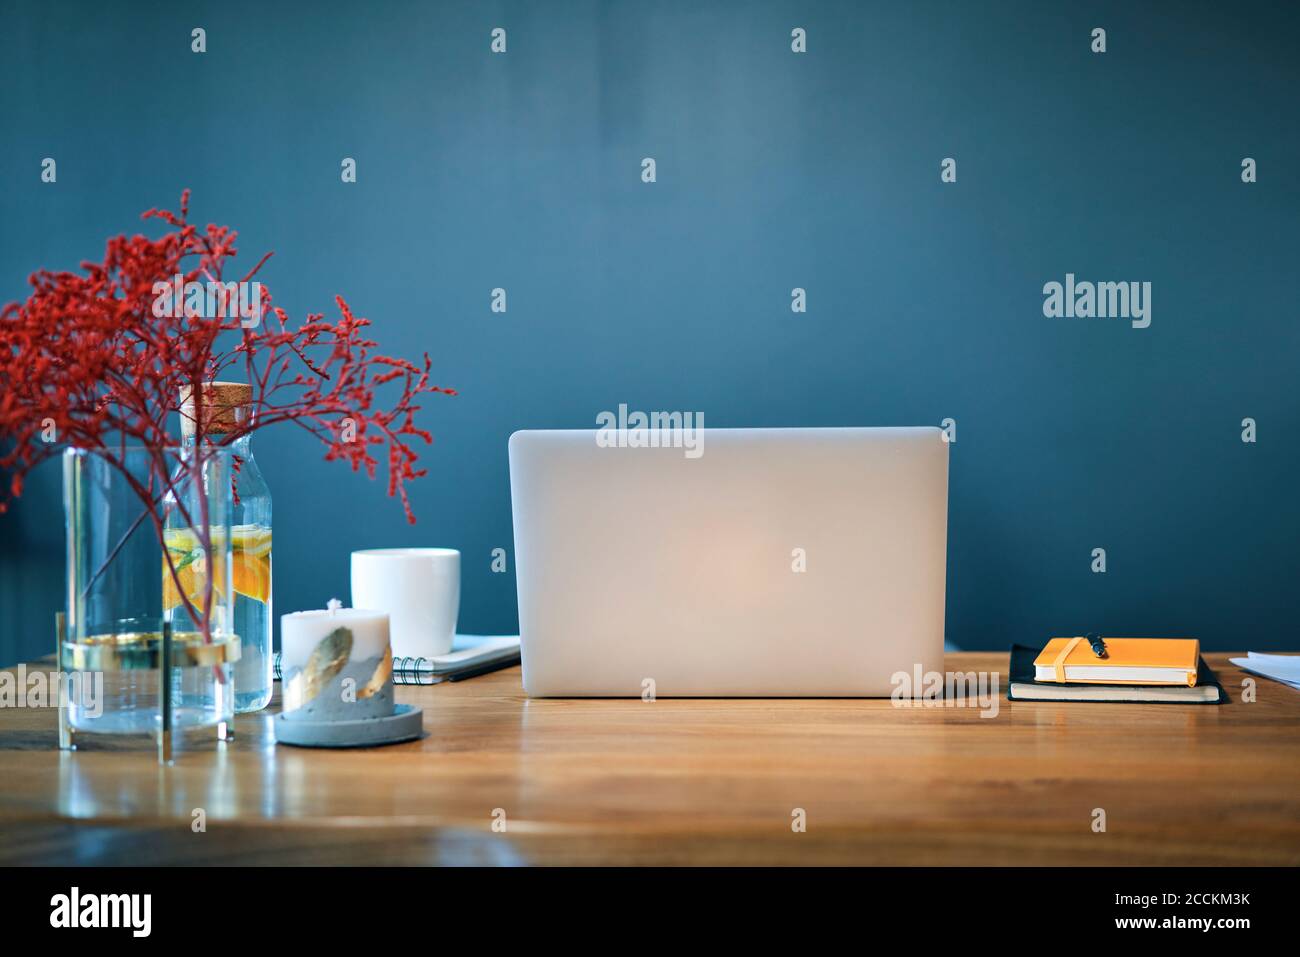 Laptop with diaries and decorations on desk against blue wall in home office Stock Photo